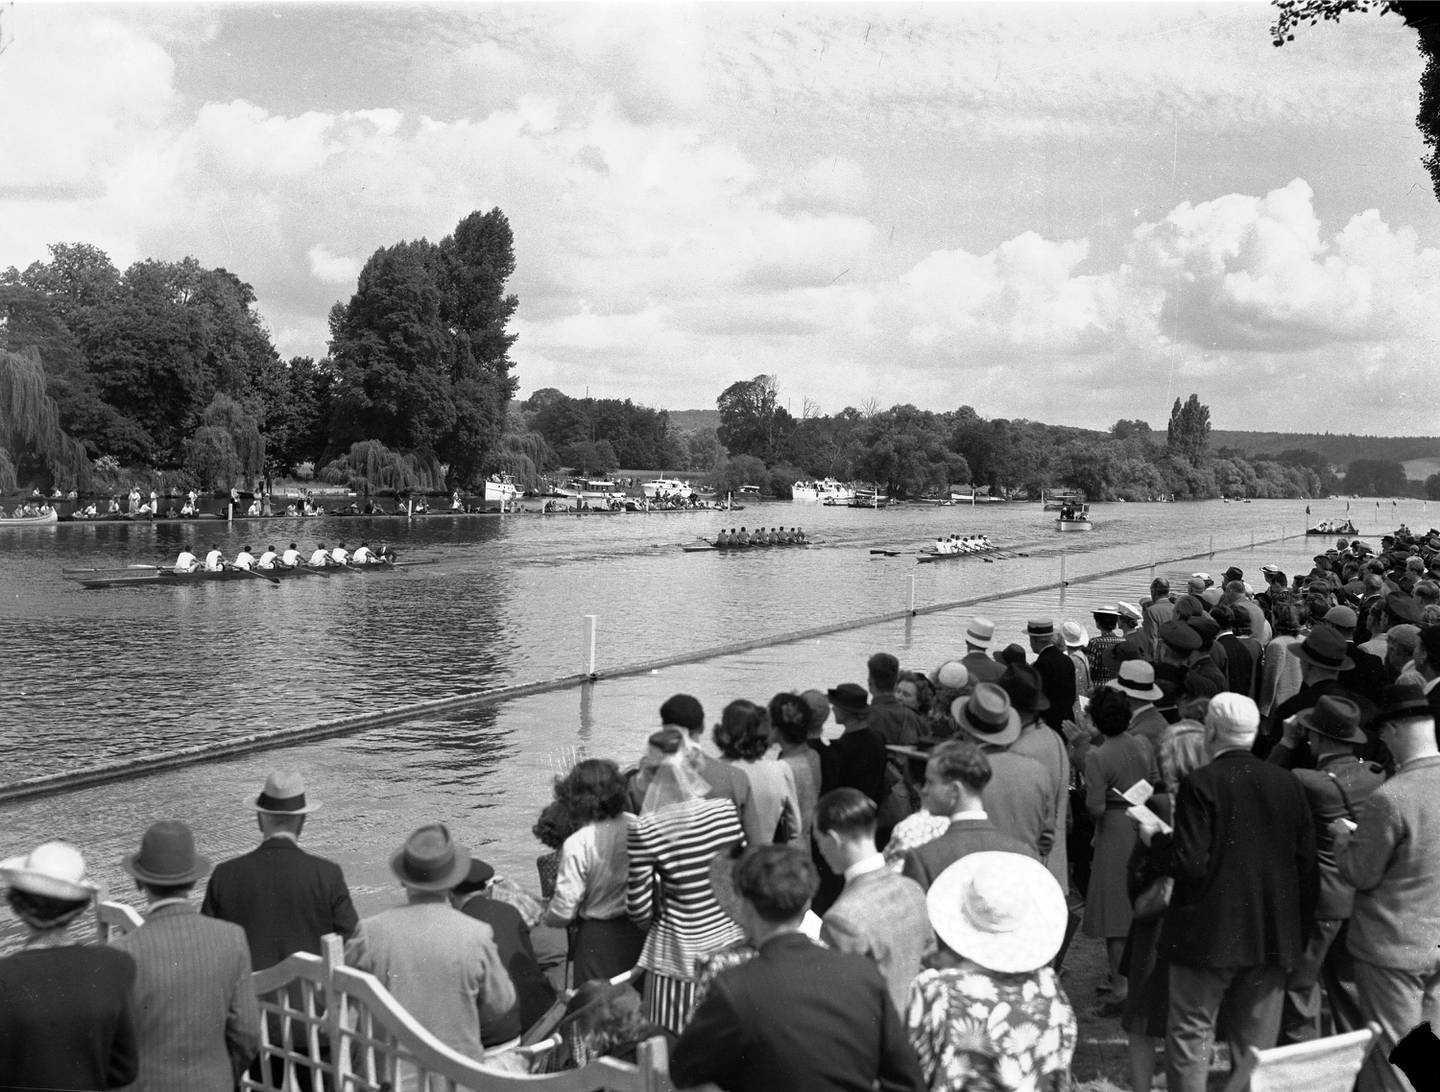 Holiday makers pack the bank of the River Thames during the Henley Regatta, Oxon., England, the first time it has been held since 1939, on July 7, 1945. The Magdalen College, Oxford, crew, left, pull away from Christ's College, Cambridge and the Royal Australian Air Force crews during the regatta. (AP Photo/Stf/Priest)